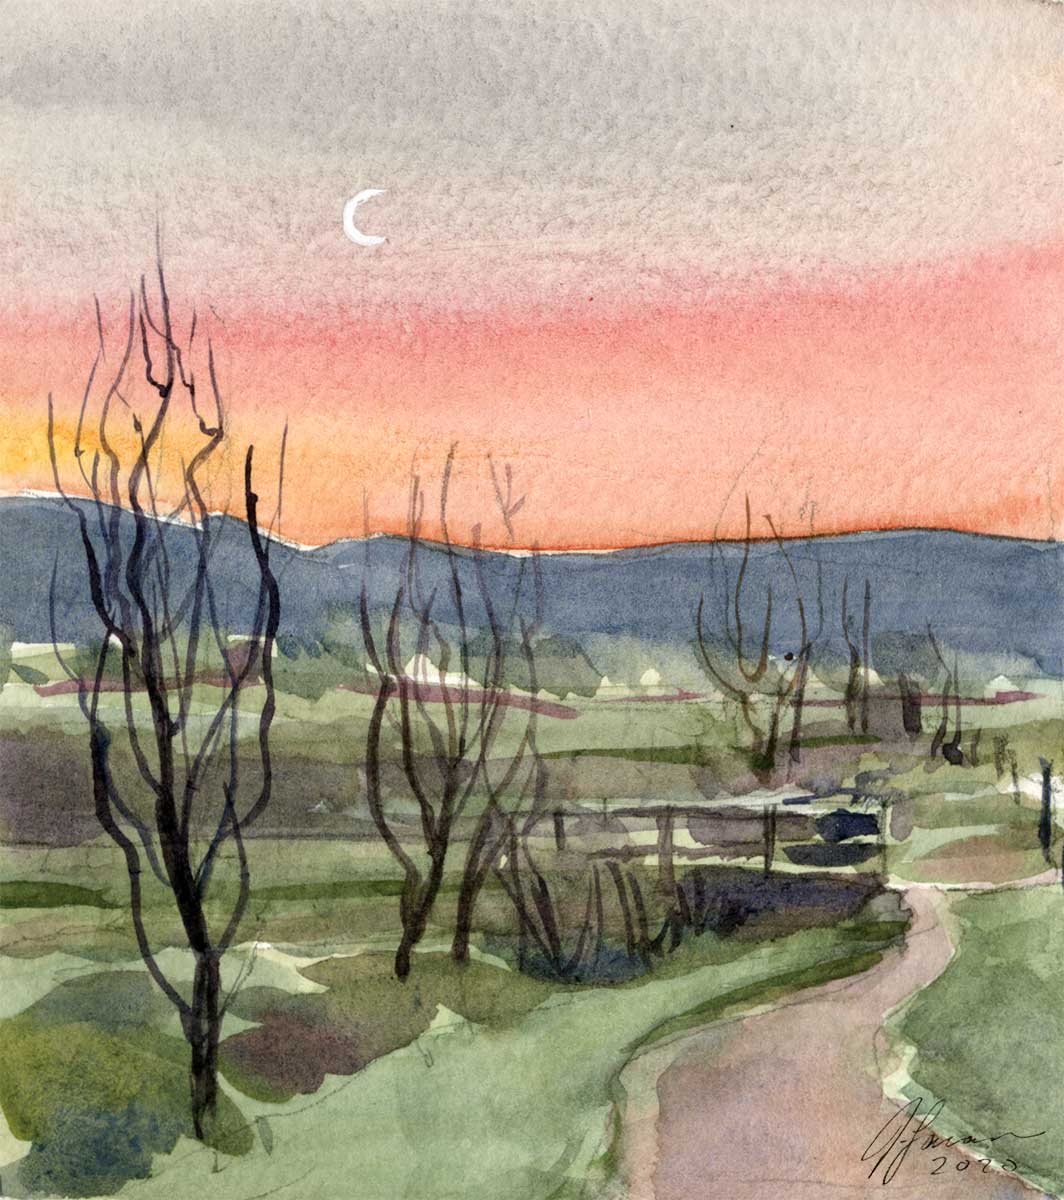 watercolor sketch of a path leading through green foliage with a blue ridge in the distance and a pink pre-dawn sky with a crescent moon.